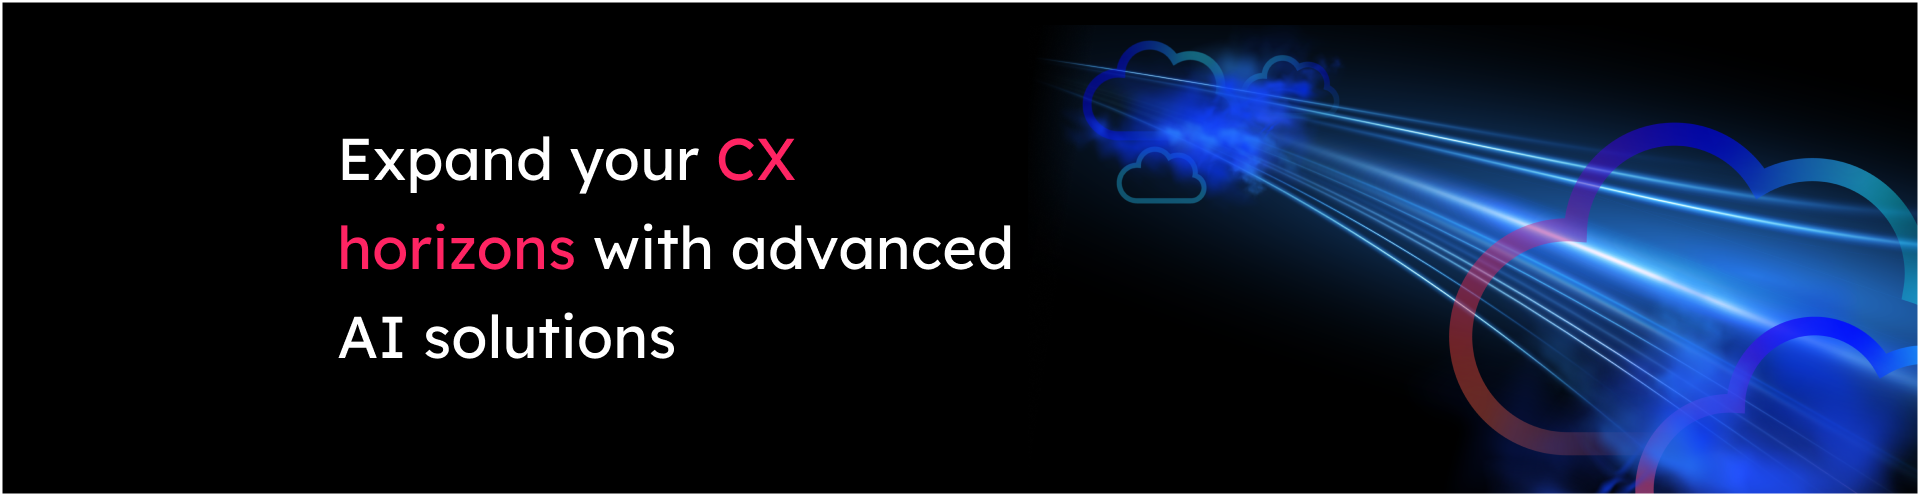 Expand your CX horizons with advanced AI solutions